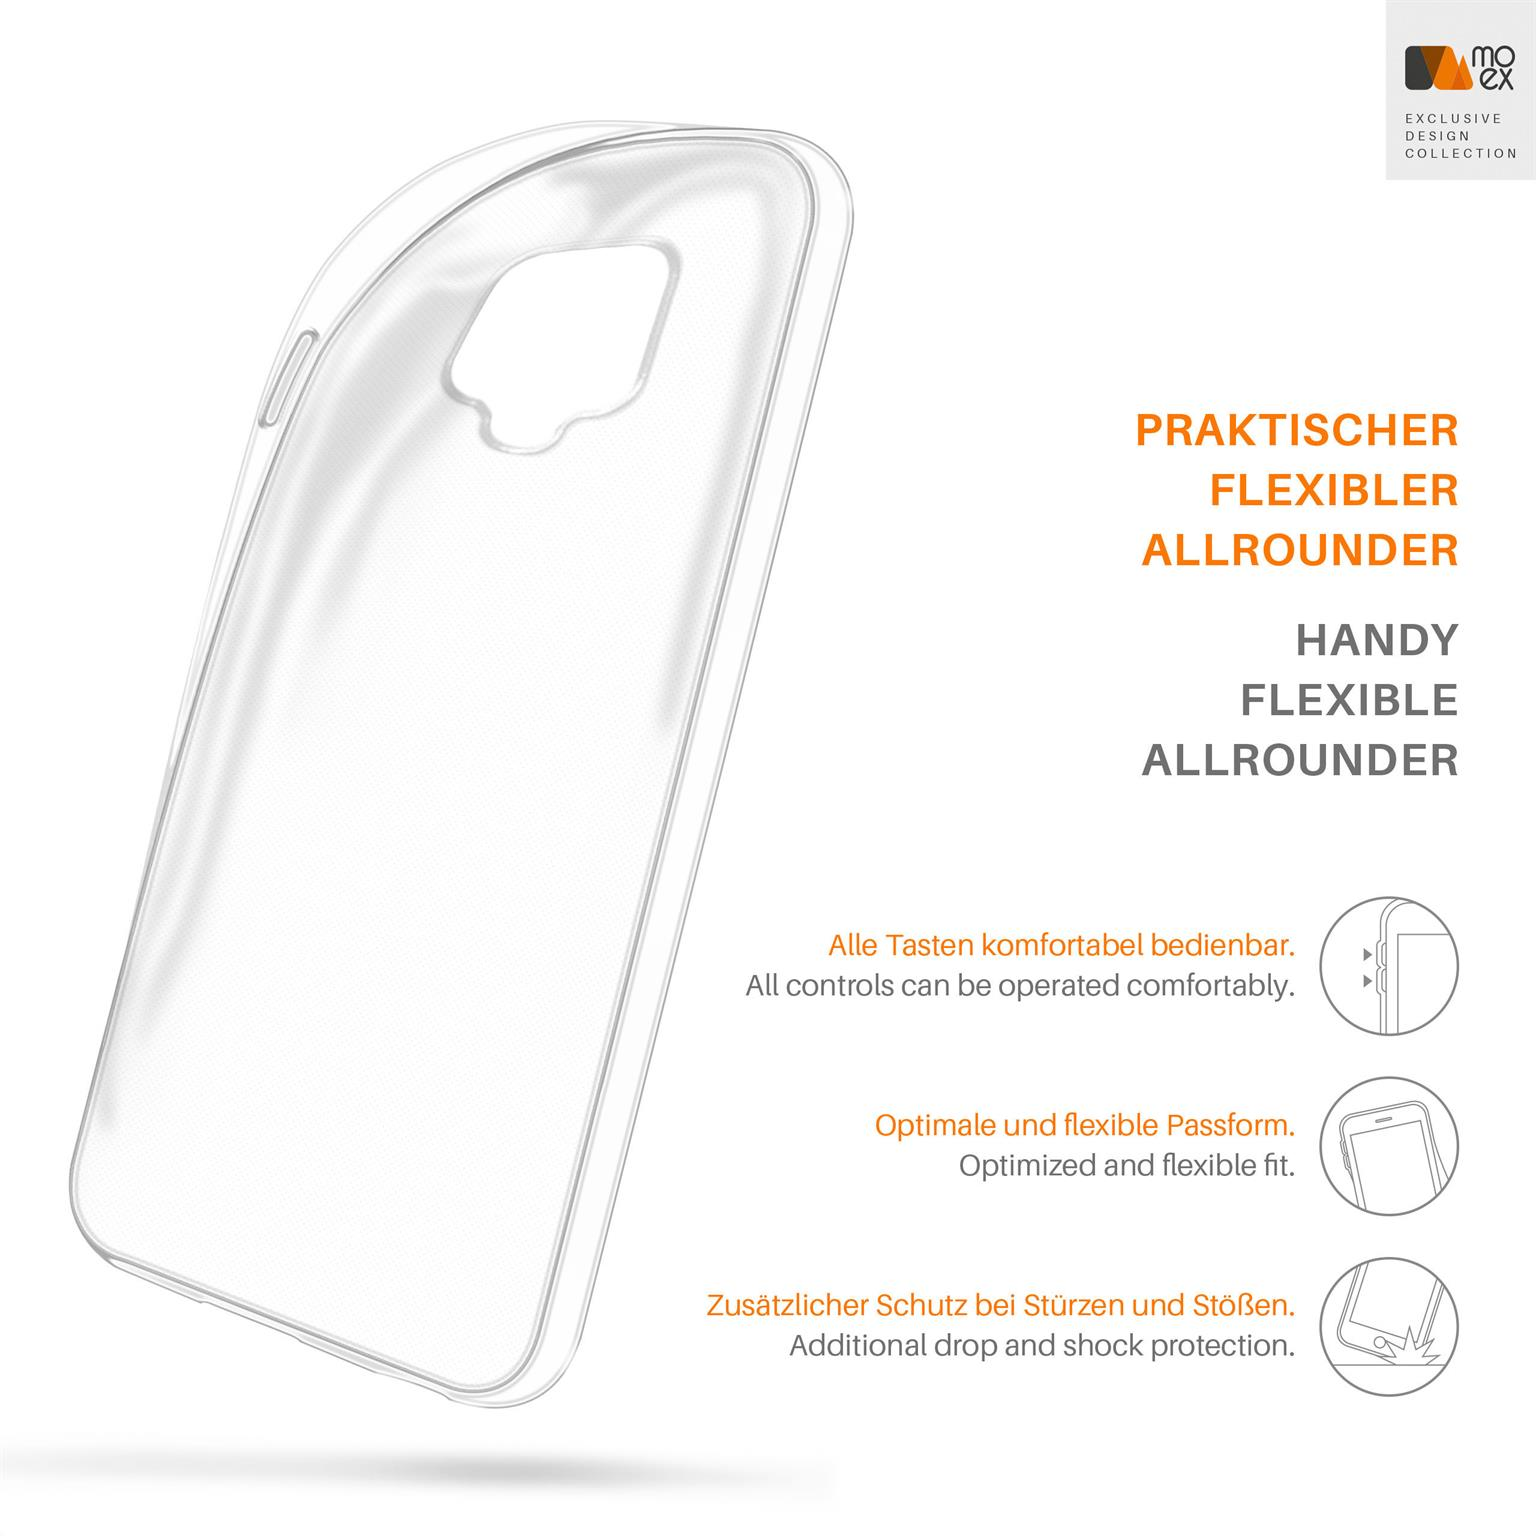 Backcover, MOEX Xiaomi, Redmi Aero Case, 9 Crystal-Clear Pro, Note